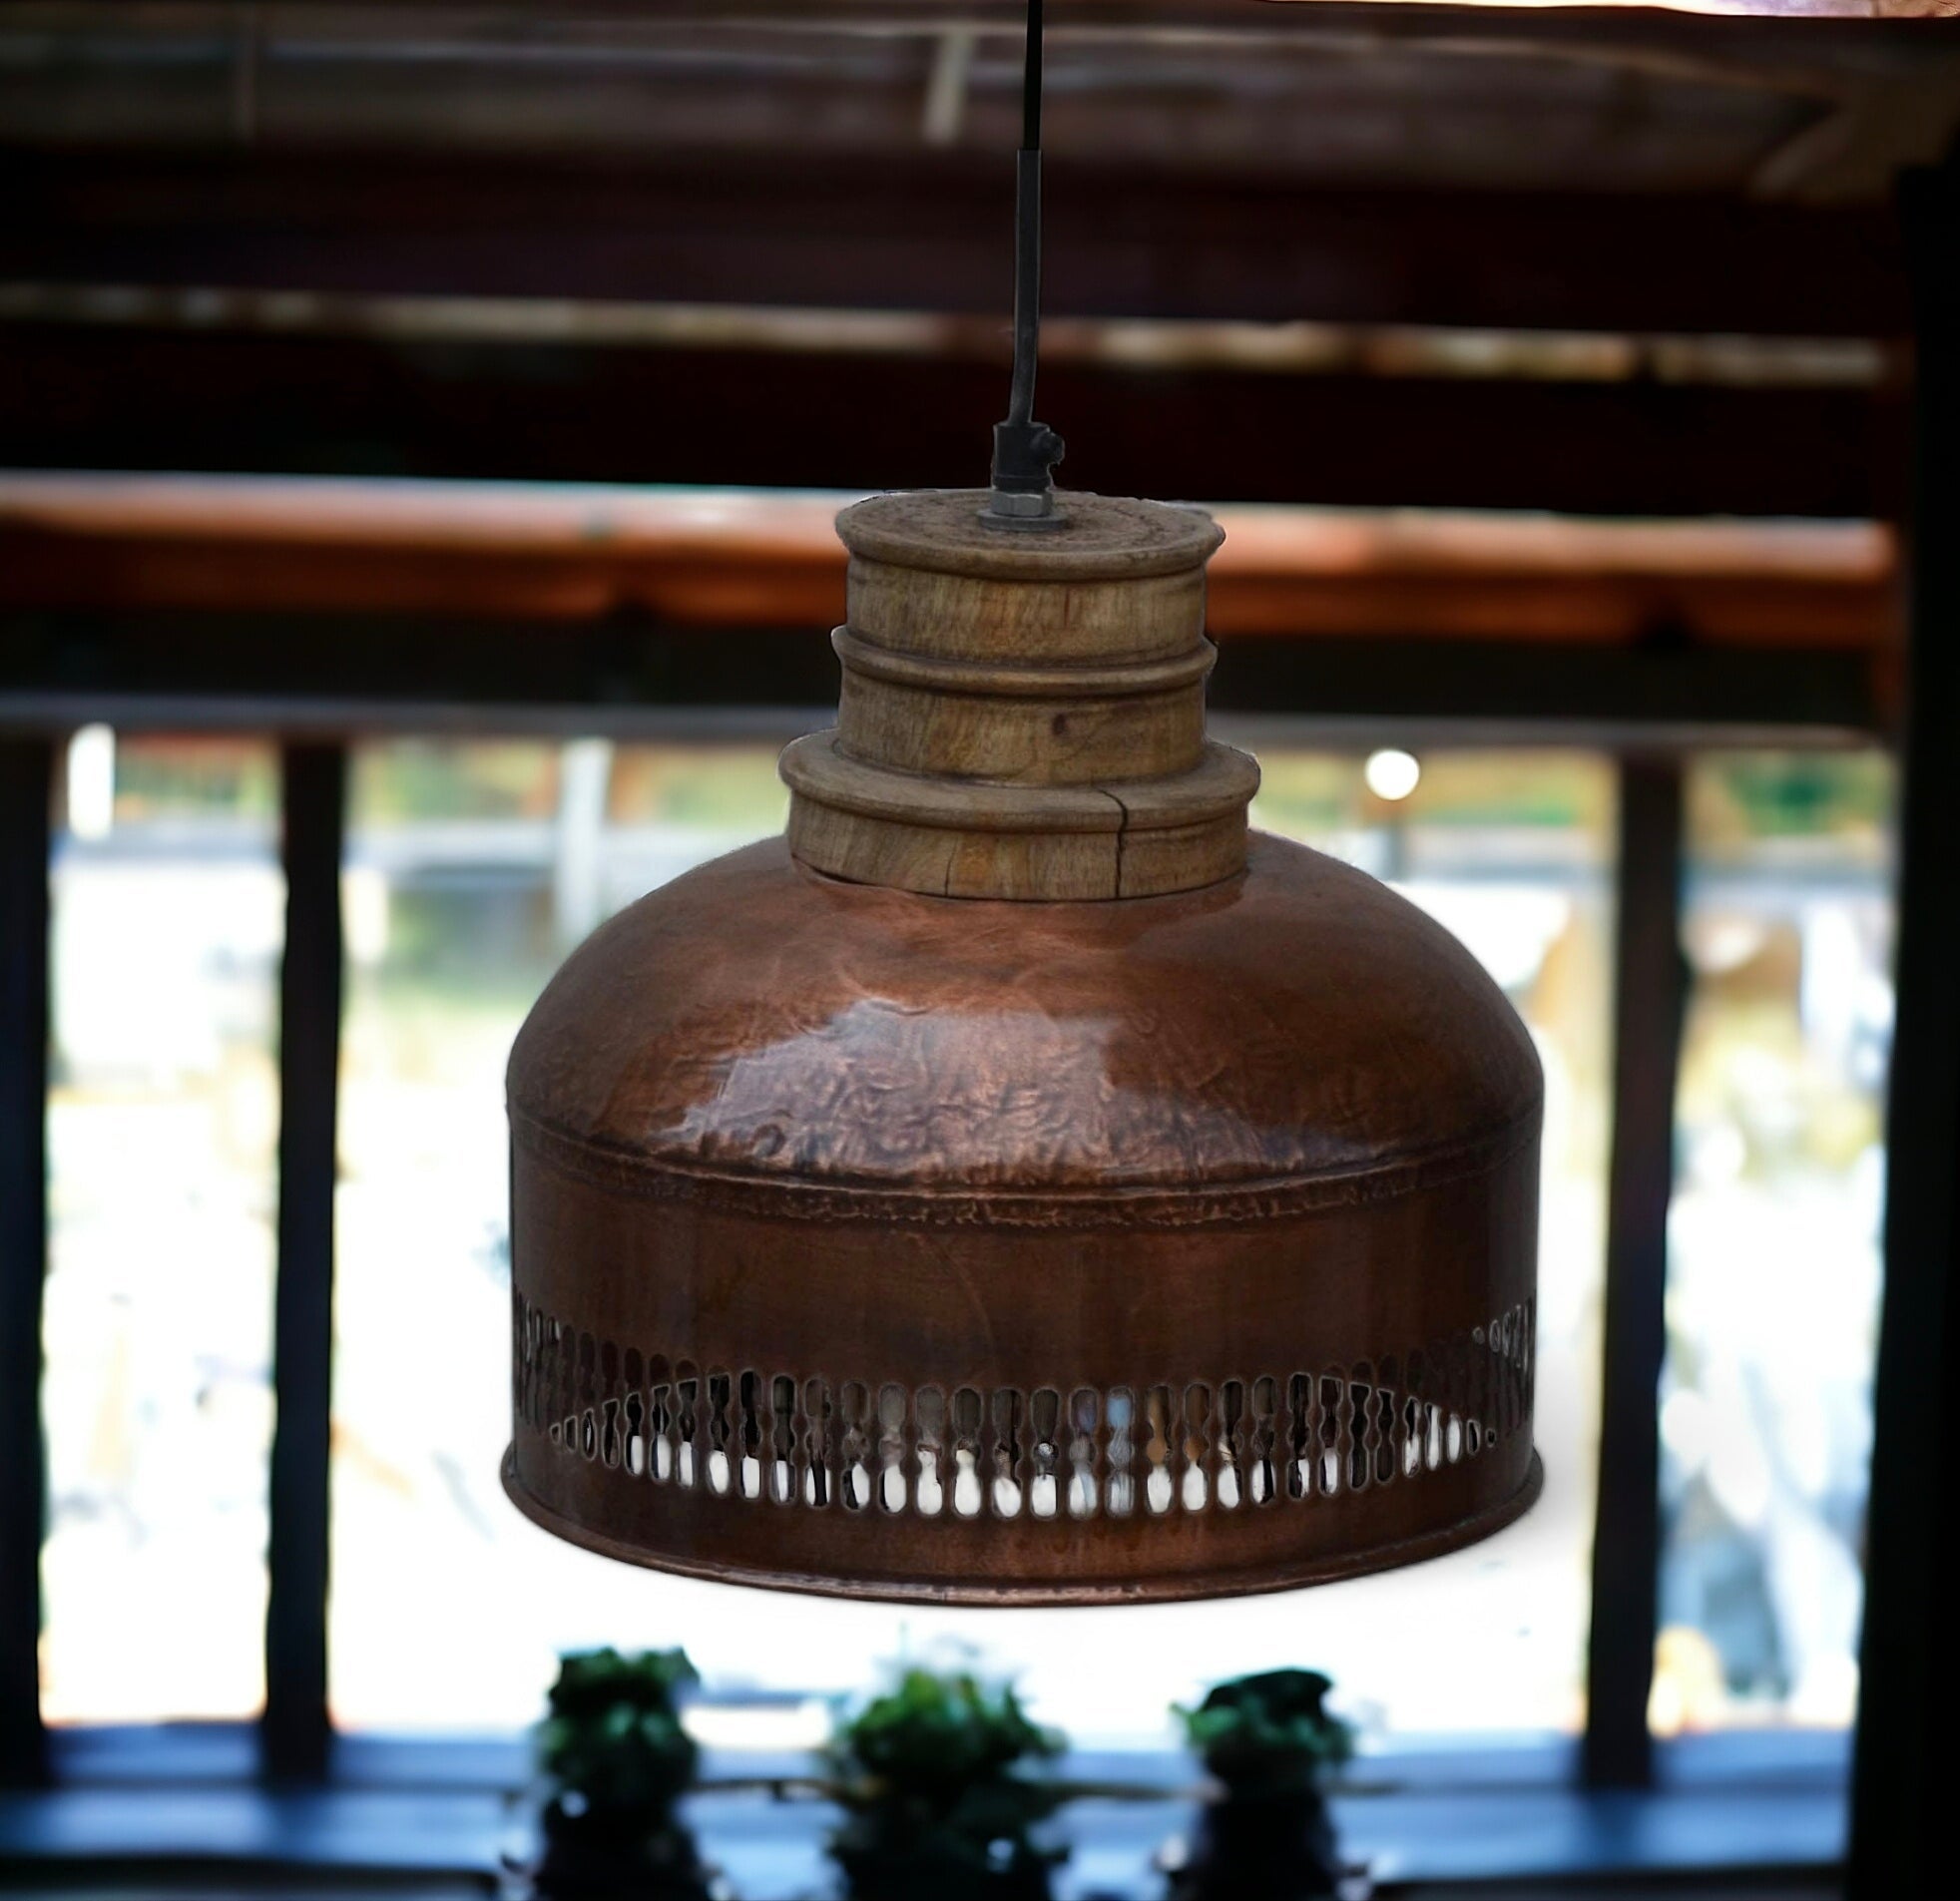 Copper And Wood Railing Lampshade